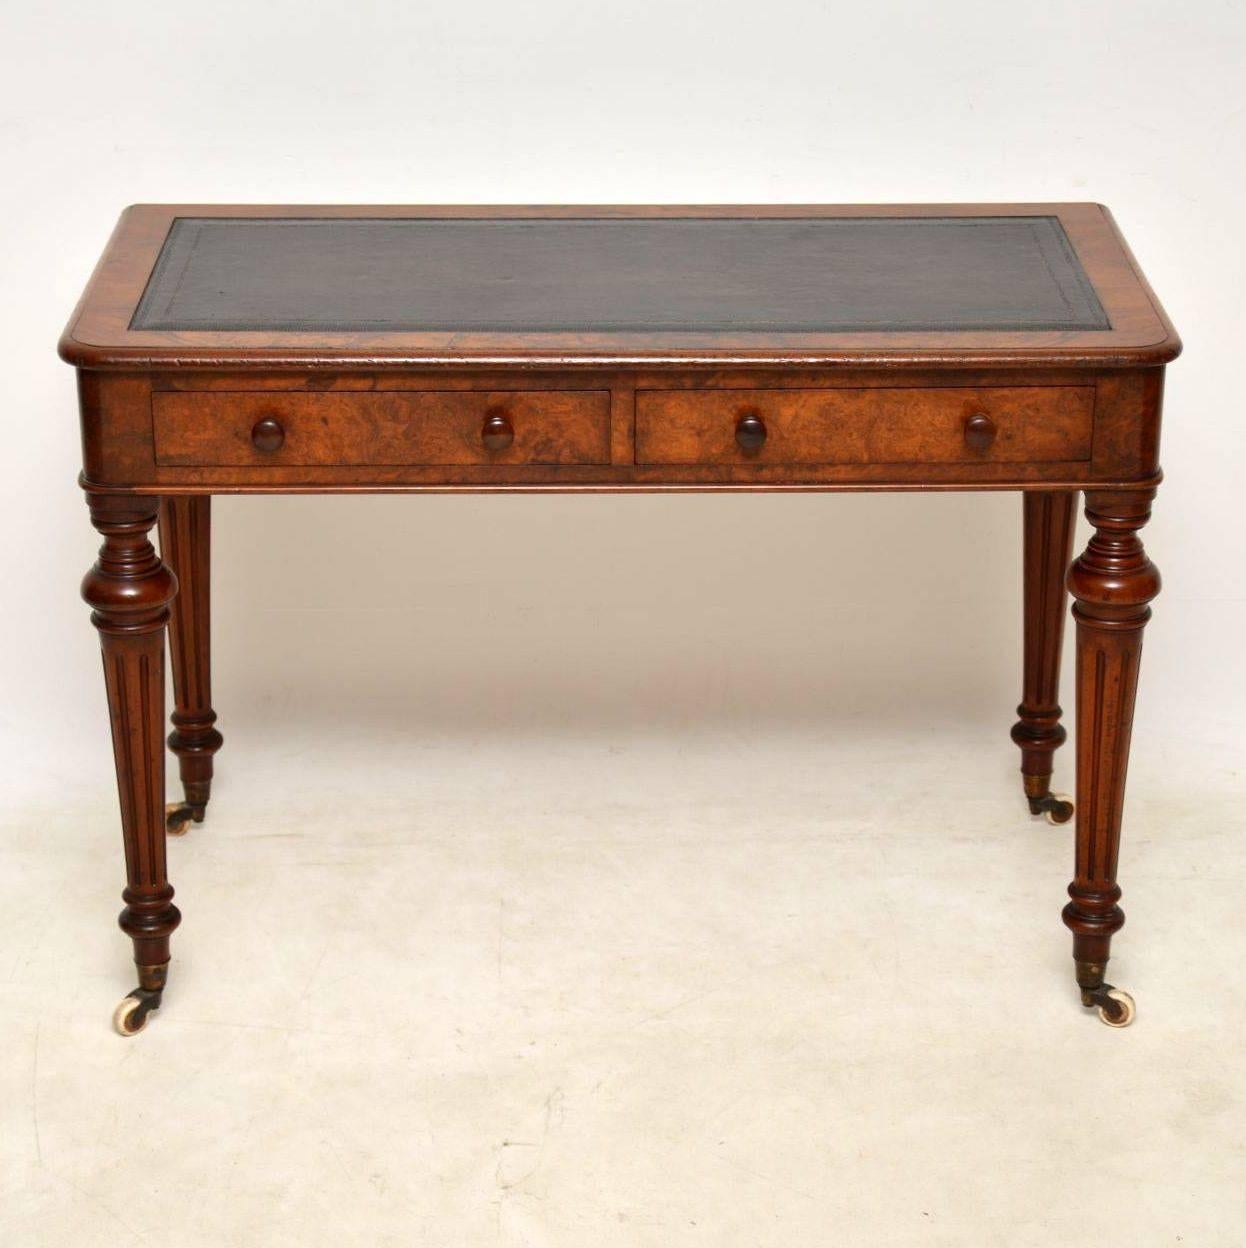 Antique early Victorian burr walnut writing table in good condition and with plenty of character. It has a faded blackish brown tooled leather writing surface. The top, front and sides are all burr walnut, while the turned fluted legs are solid